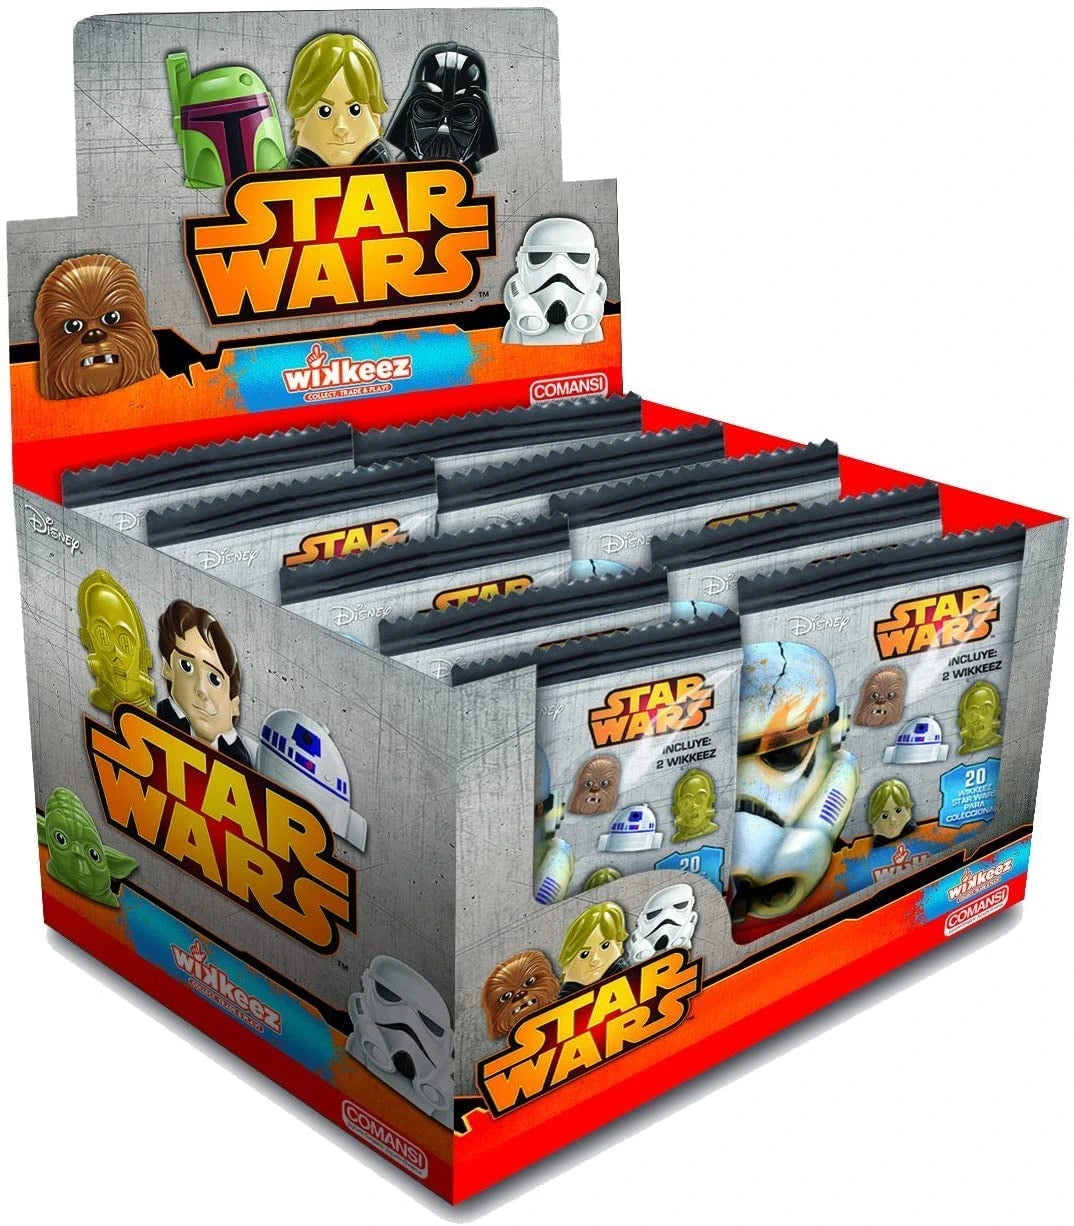 Star Wars Wikkeez Blind Bag Each Contains 2 Collectible Figures - Toptoys2u